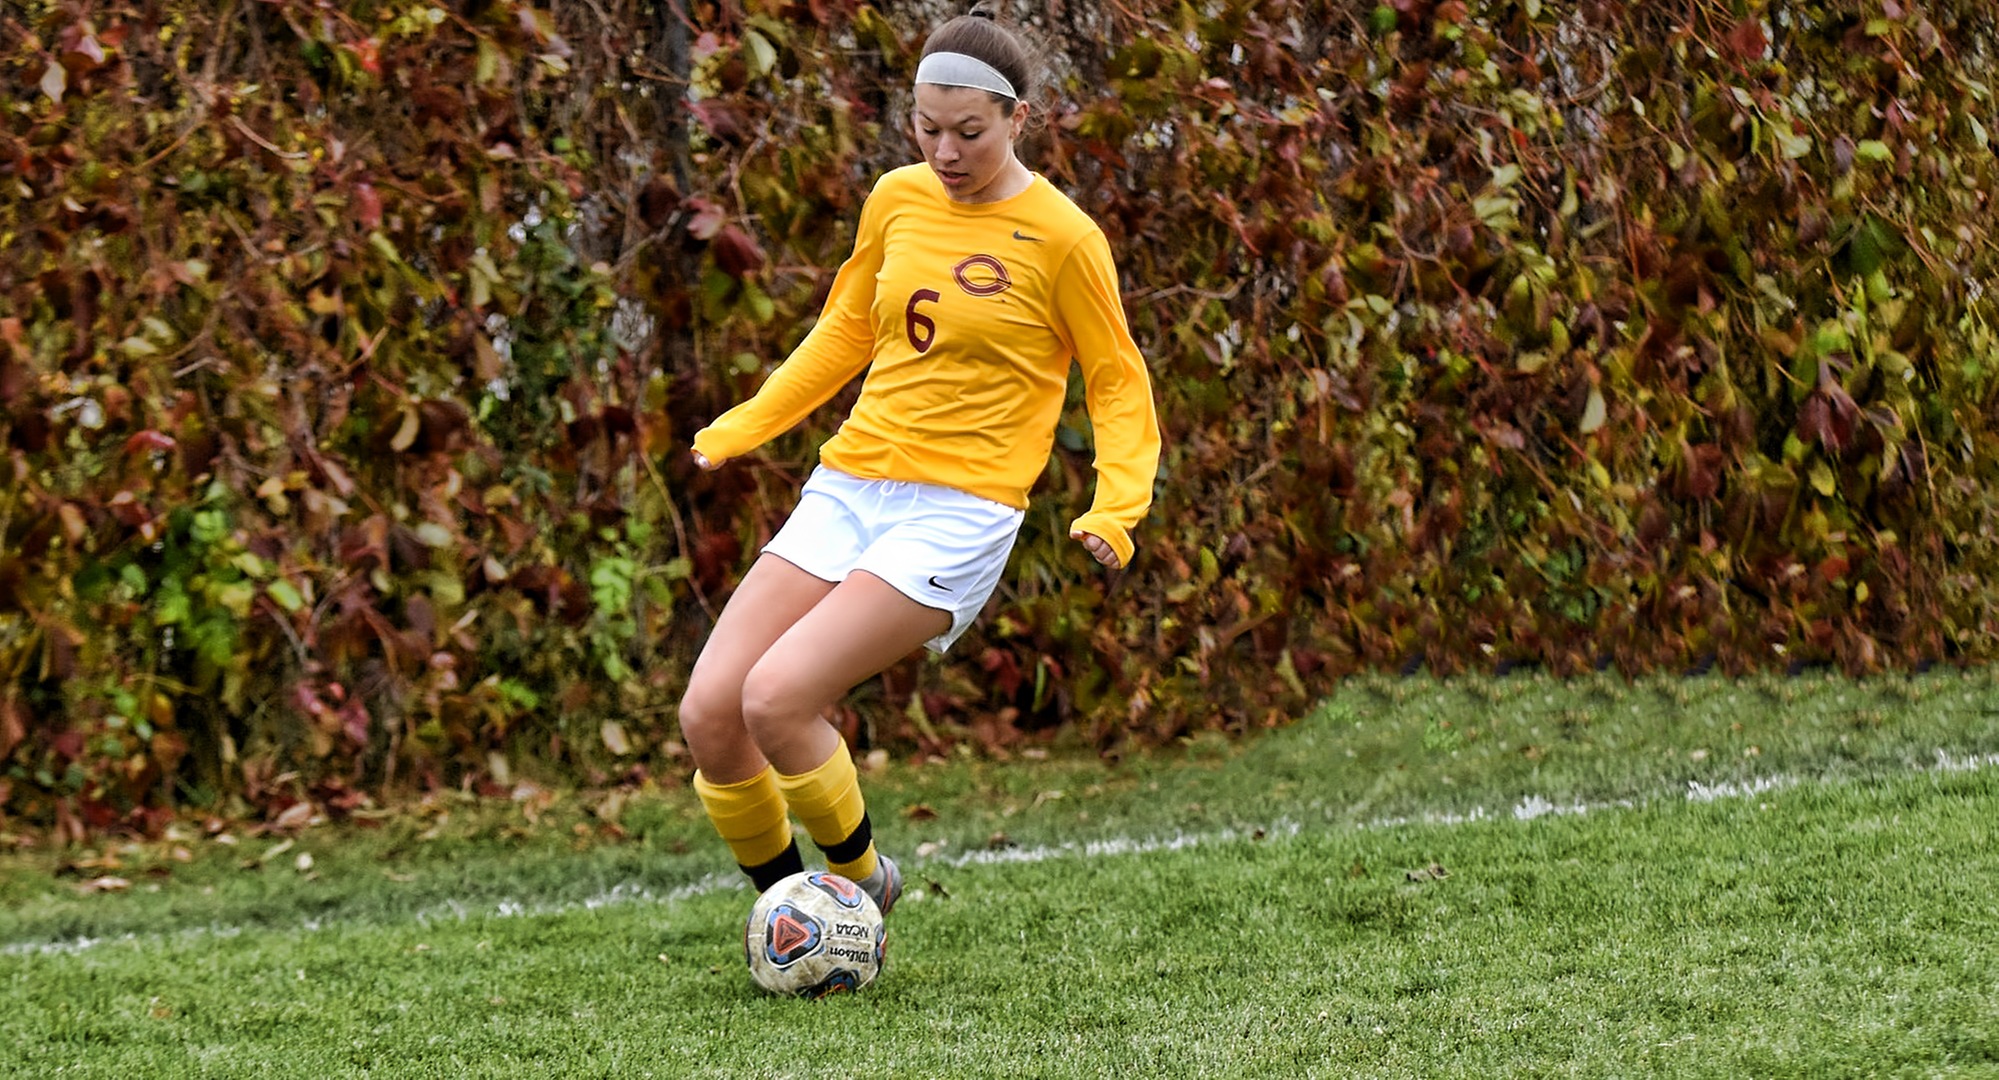 Freshman Samantha Holmberg scored the lone goal for the Cobbers in their game at Macalester.